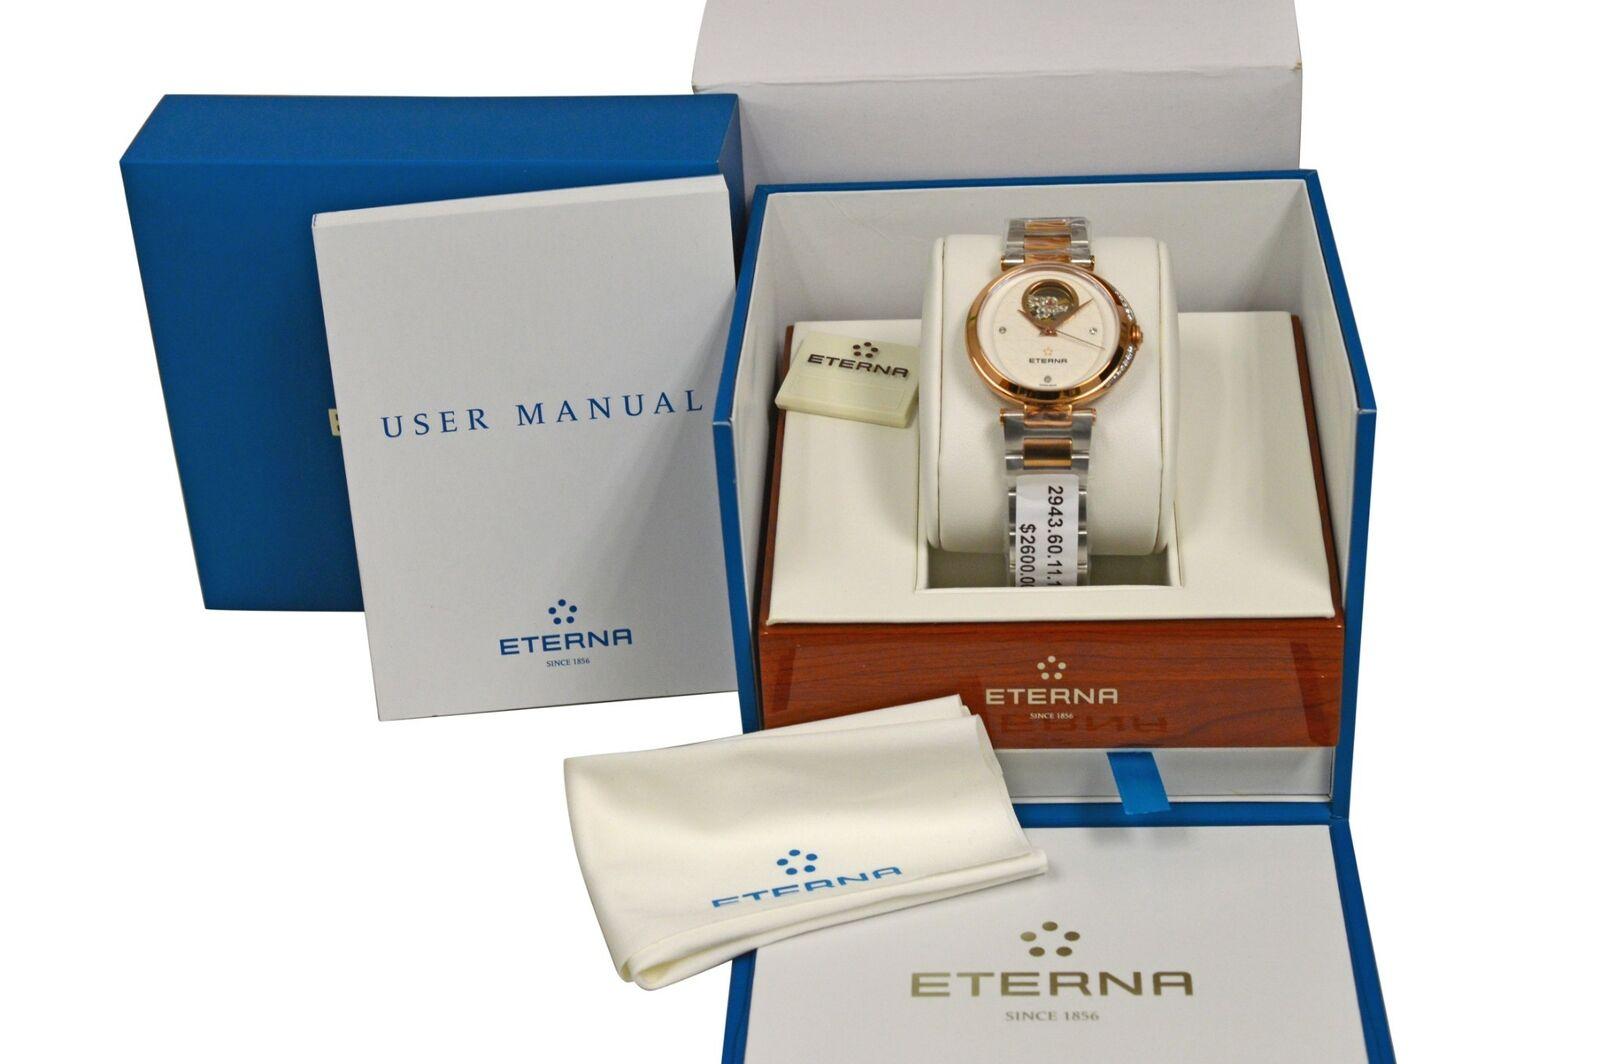 
Brand	Eterna
Model	Grace Open Art 2943.60.11.1730
Gender	Ladies
Condition	New
Movement	Swiss Automatic
Case Material	Stainless Steel & Gold Tone
Bracelet / Strap Material	
Stainless Steel & Gold Tone

Clasp / Buckle Material	
Stainless steel

Clasp